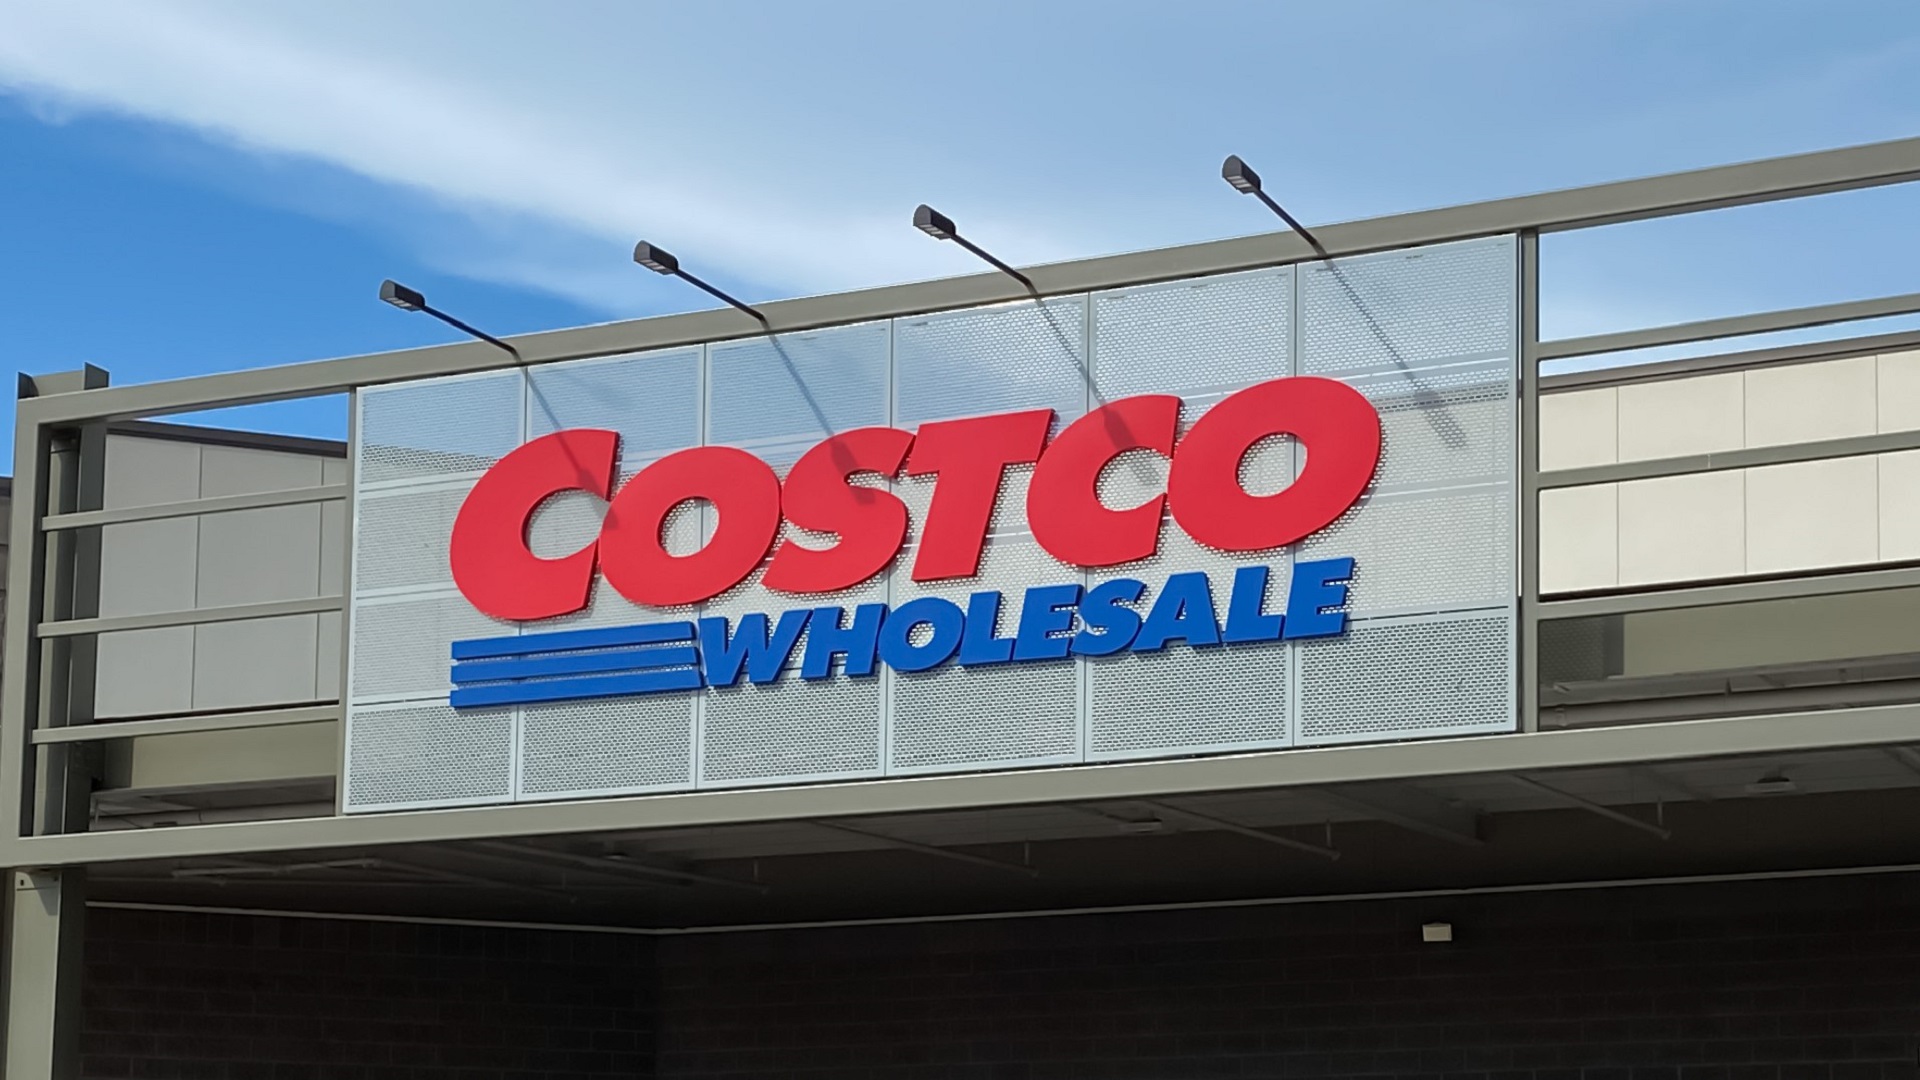 overconsuming is hurting your pockets: avoid these 6 household items at costco